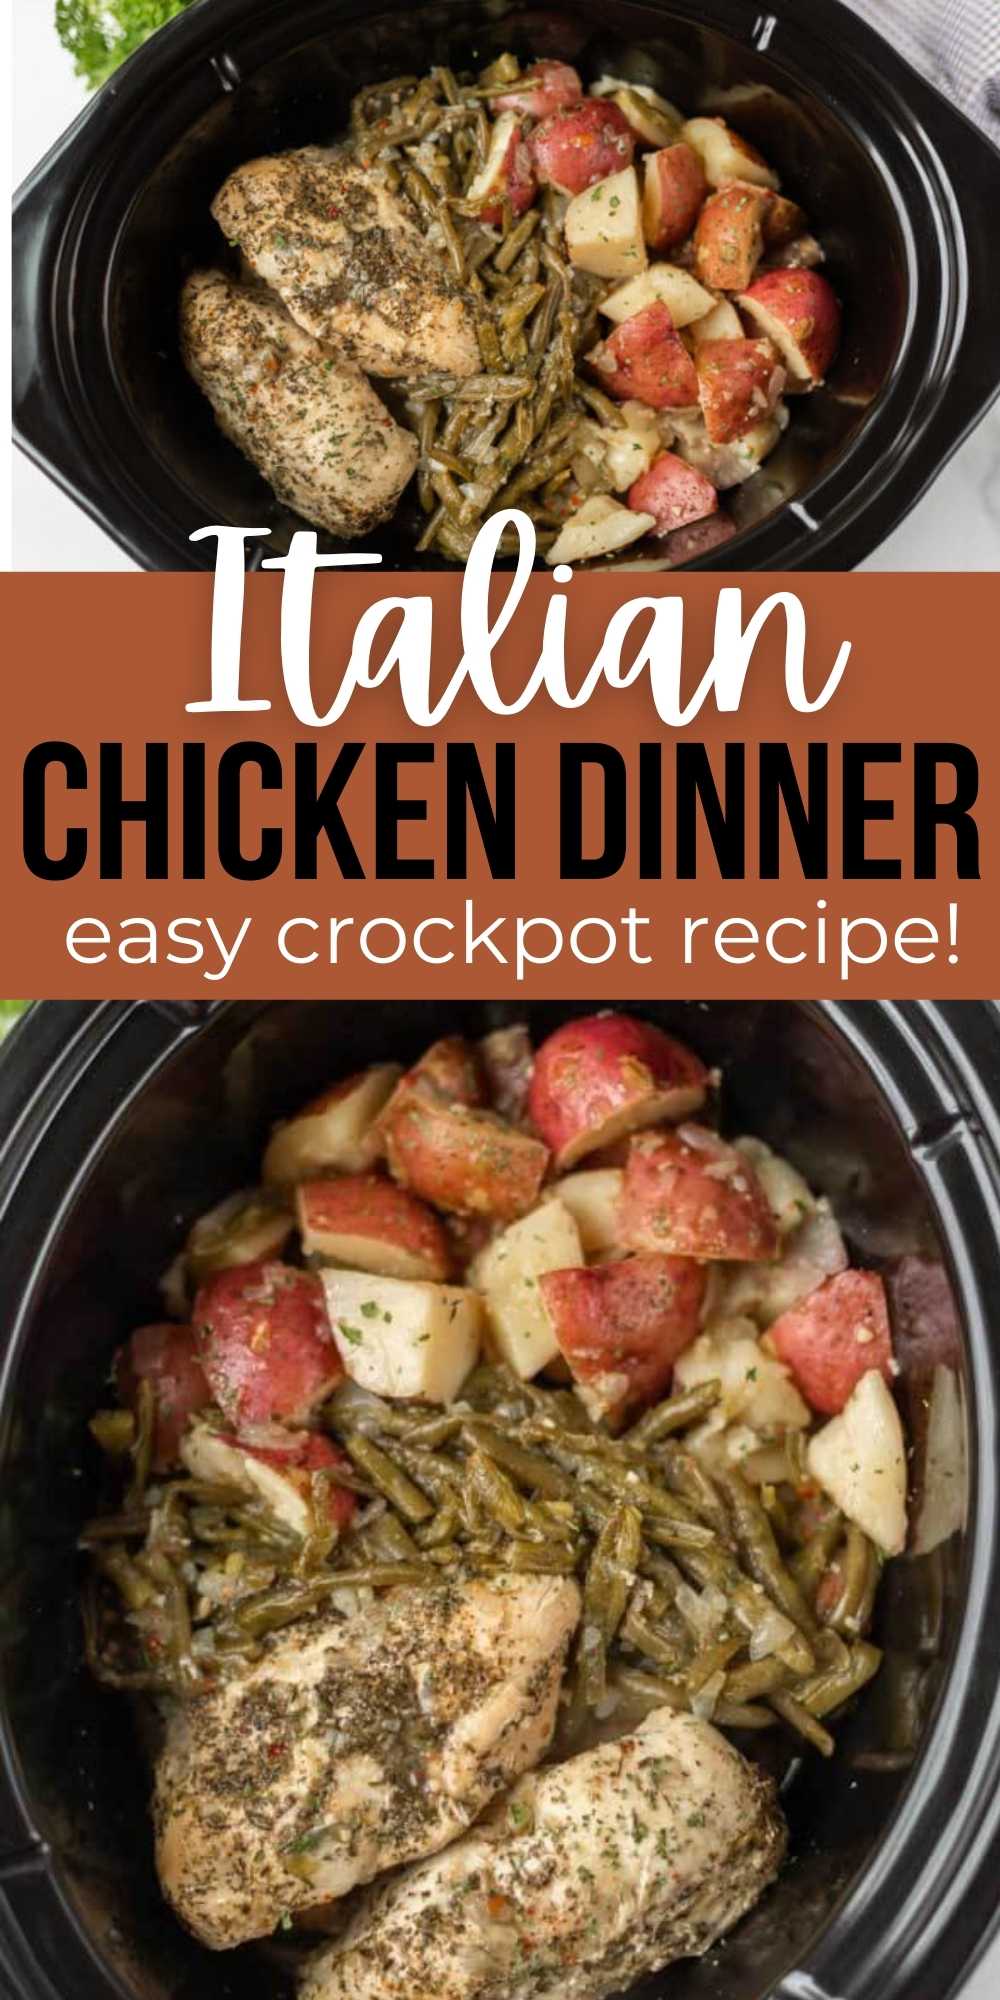 Crockpot Italian dressing chicken is such an easy one pot meal recipe. Slow Cooker Italian chicken and potatoes is packed with flavor. This Crock Pot Italian Chicken Dinner is easy to make and packed with flavor too.  #eatingonadime #crockpotrecipes #slowcookerrecipes #chickenrecipes #Italianrecipes  
